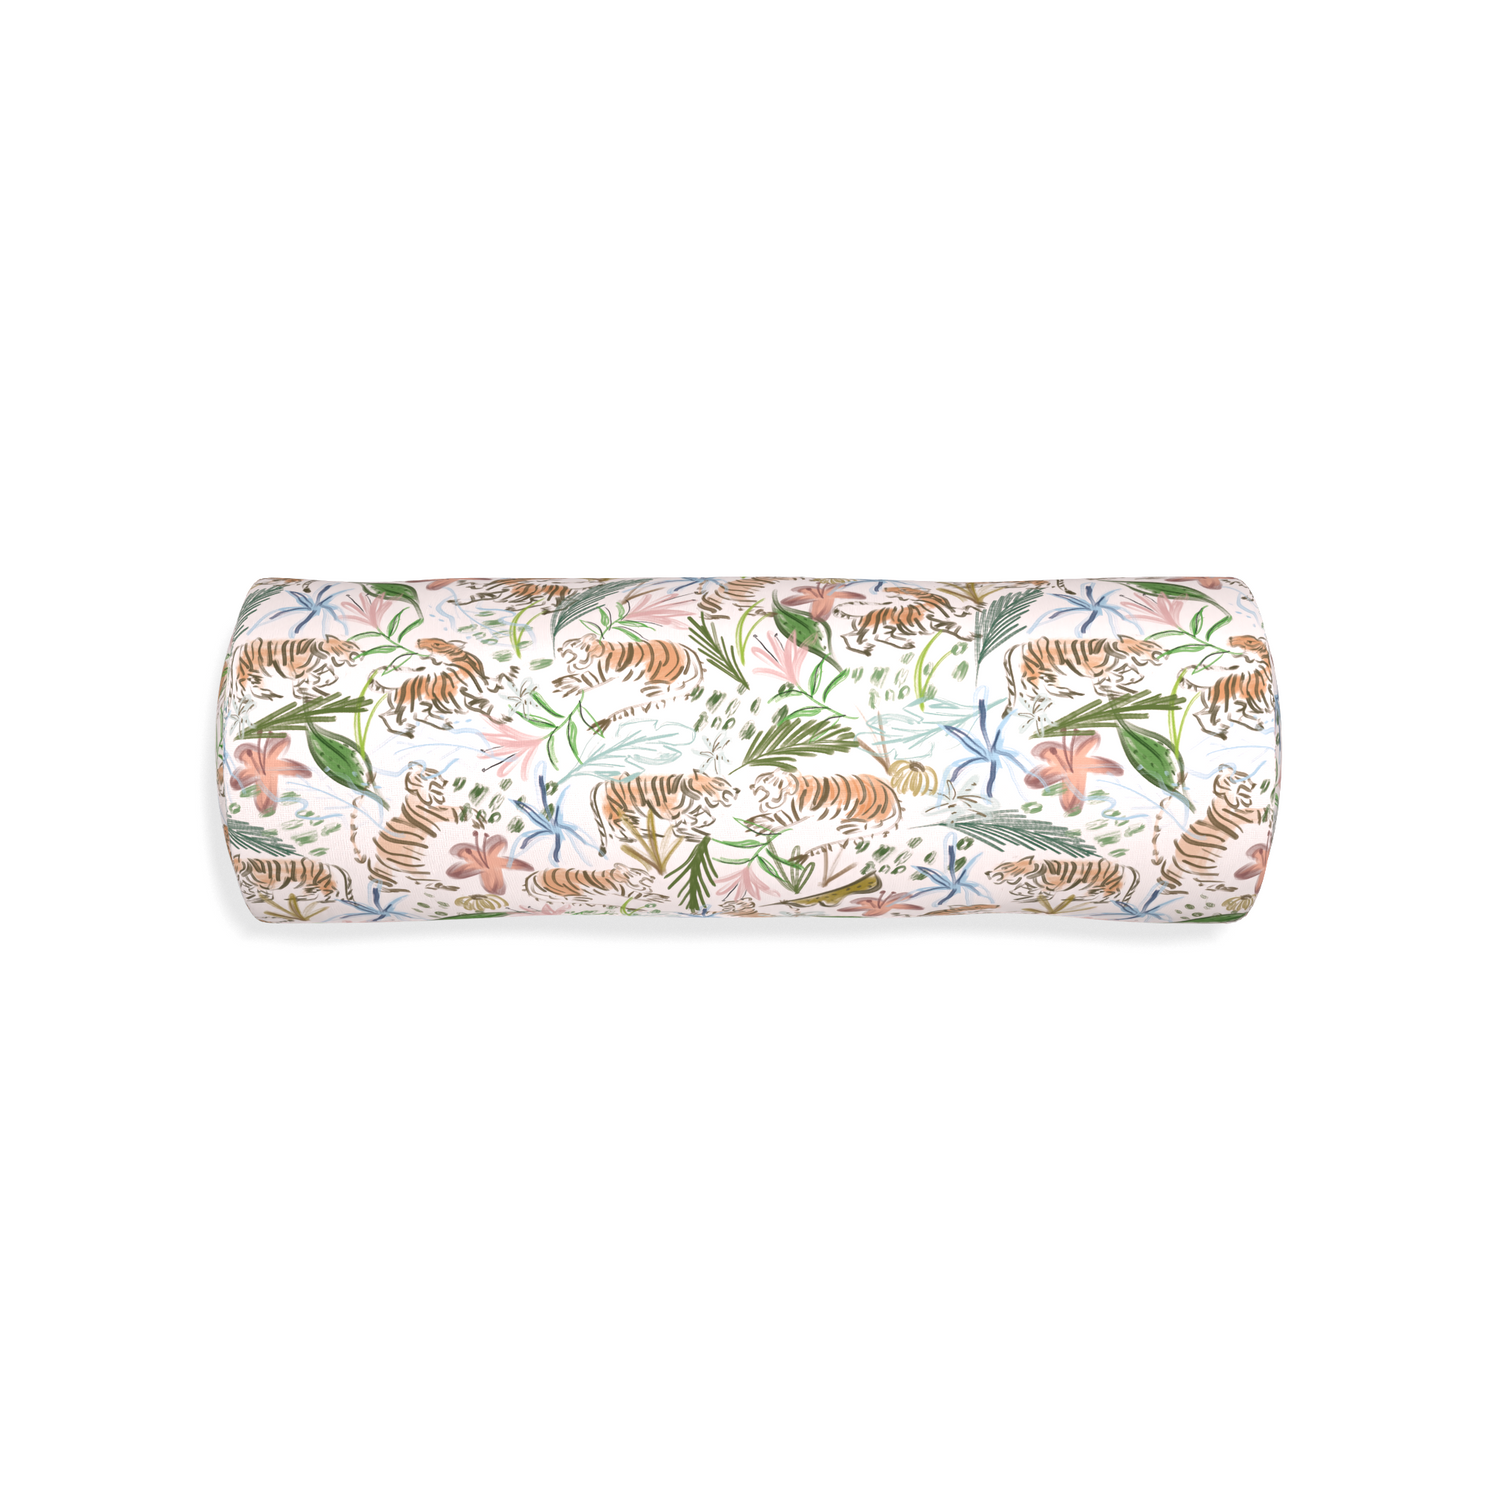 Bolster frida pink custom pink chinoiserie tigerpillow with none on white background